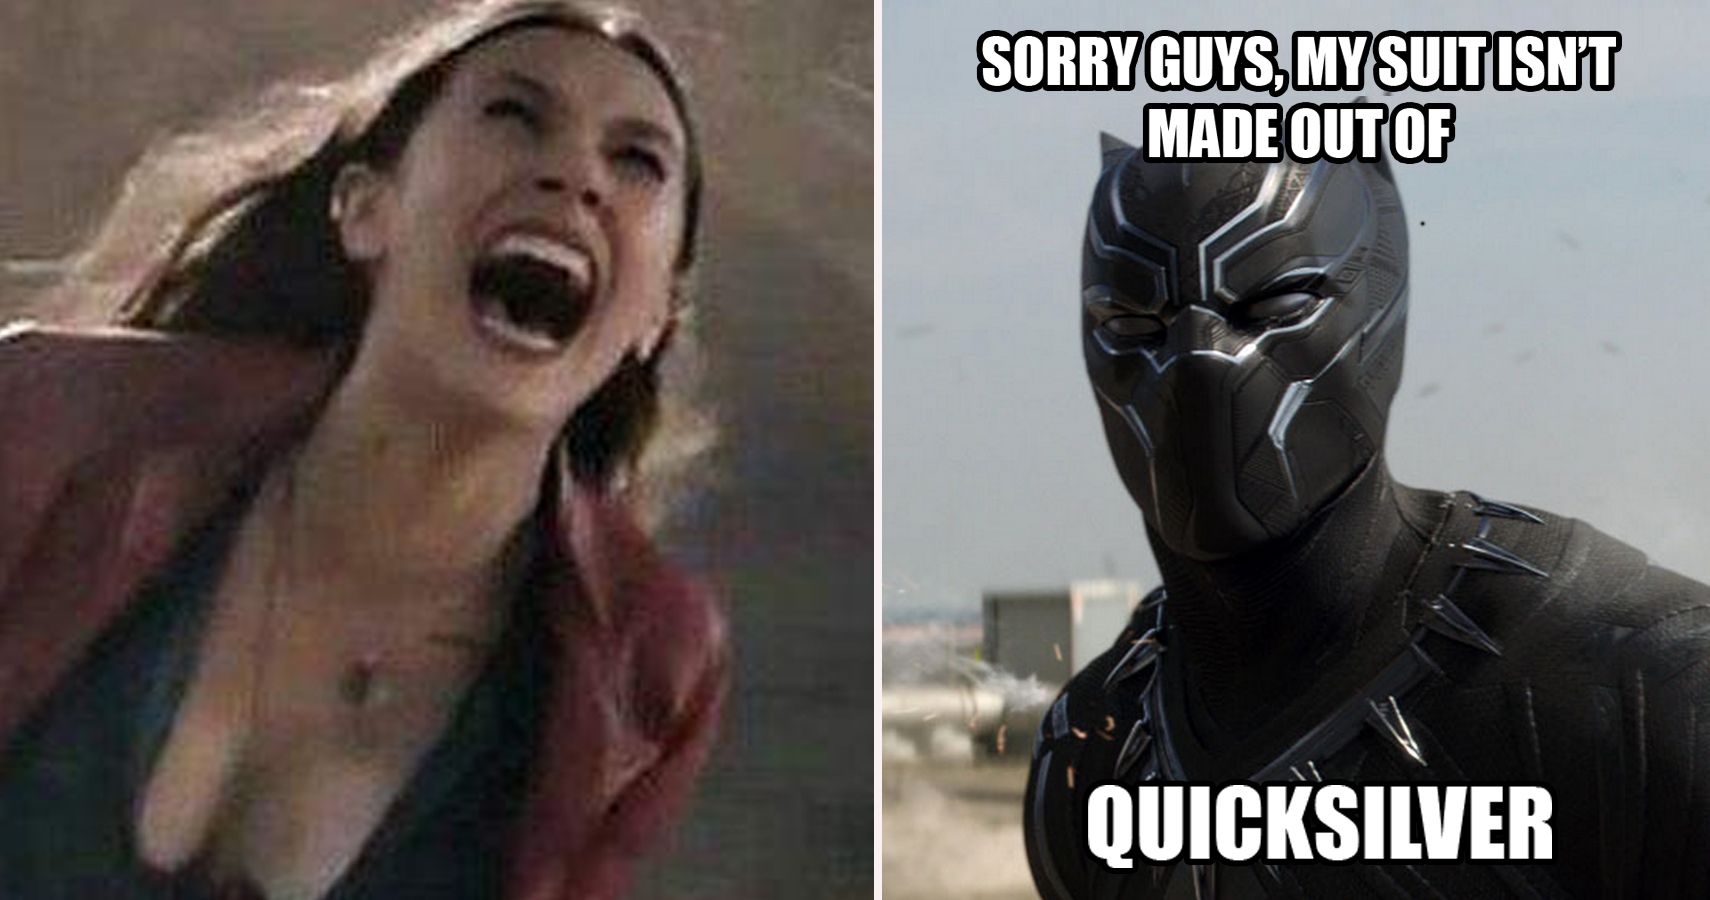 20 Hilarious Black Panther Memes That Only True Fans Will Understand